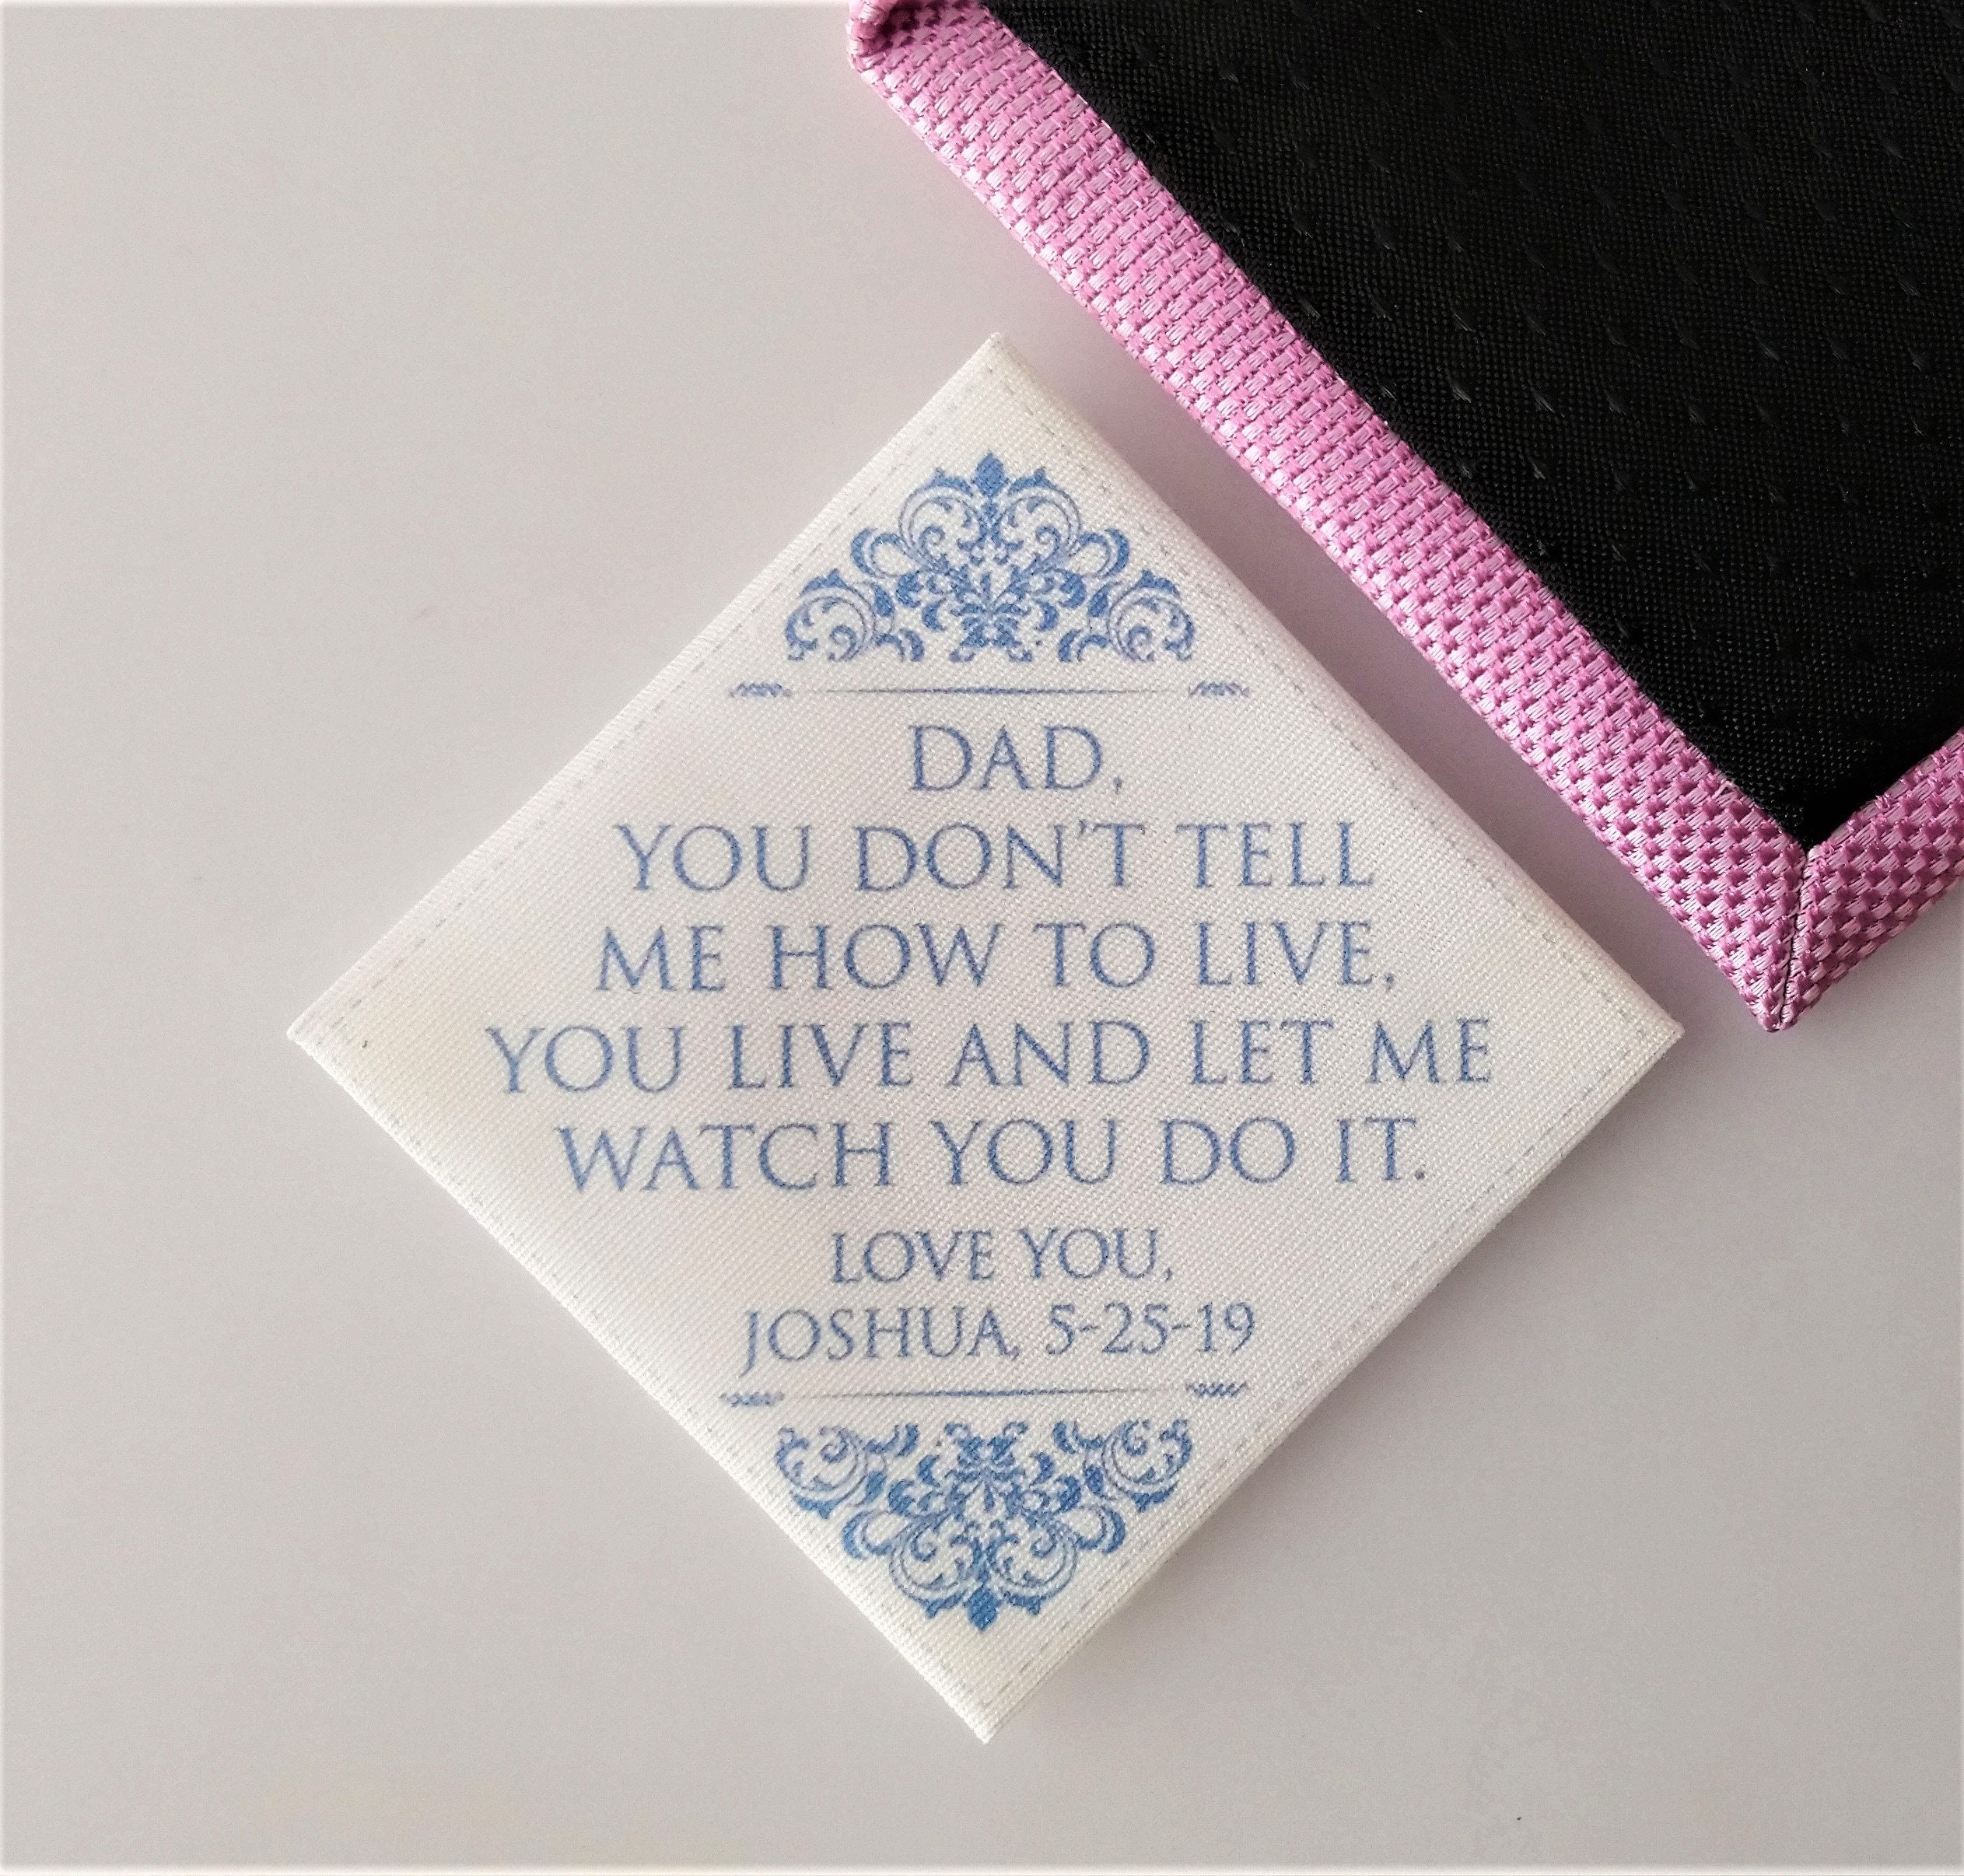 Father’s Tie Patch - Dad, You Don’t Tell Me How To Live, Live & Let Watch Do It